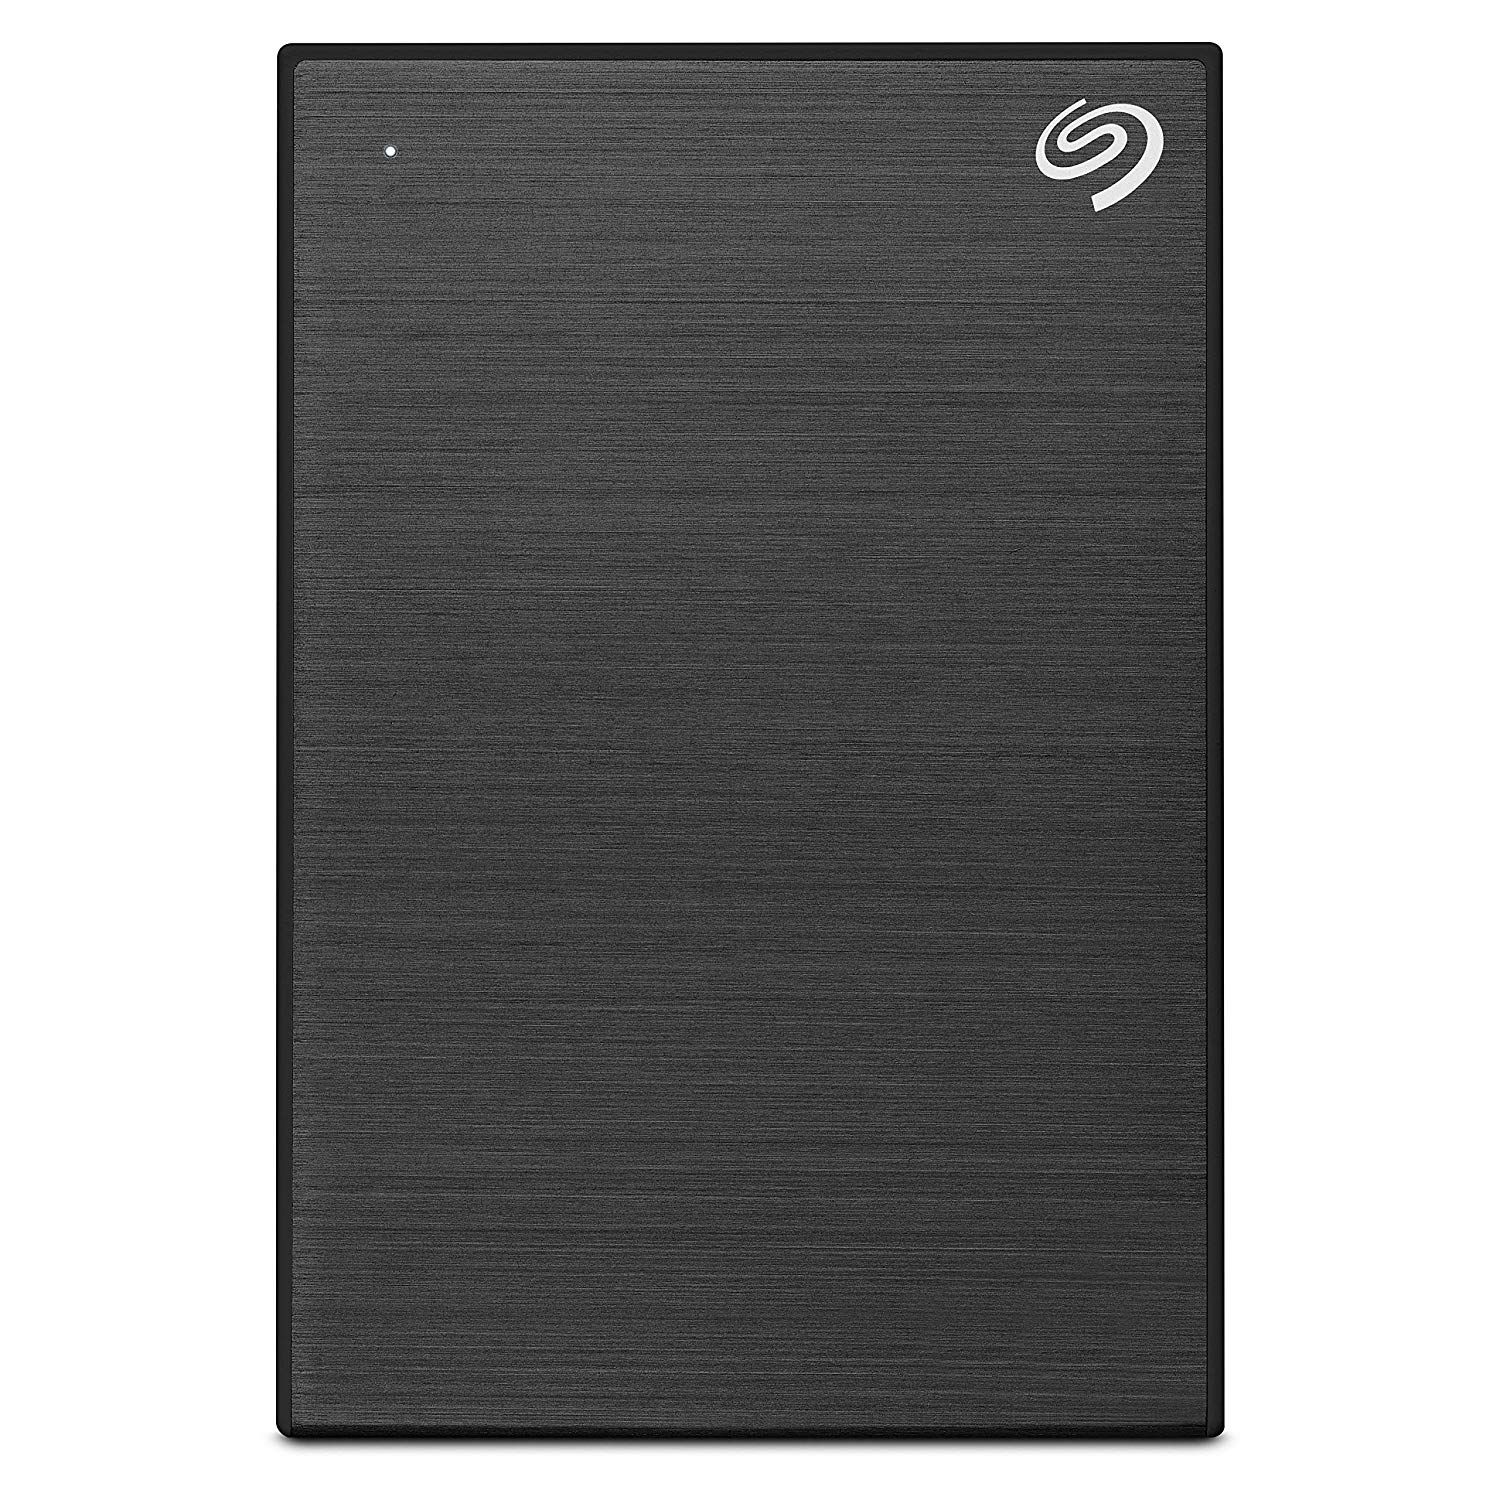 Seagate Backup Plus Slim 1TB External Hard Drive Portable HDD-Black USB 3.0 for PC Laptop and Mac, 1 year Mylio Create, 4 Months Adobe CC Photography, and 3-year Rescue Services (STHN1000400)